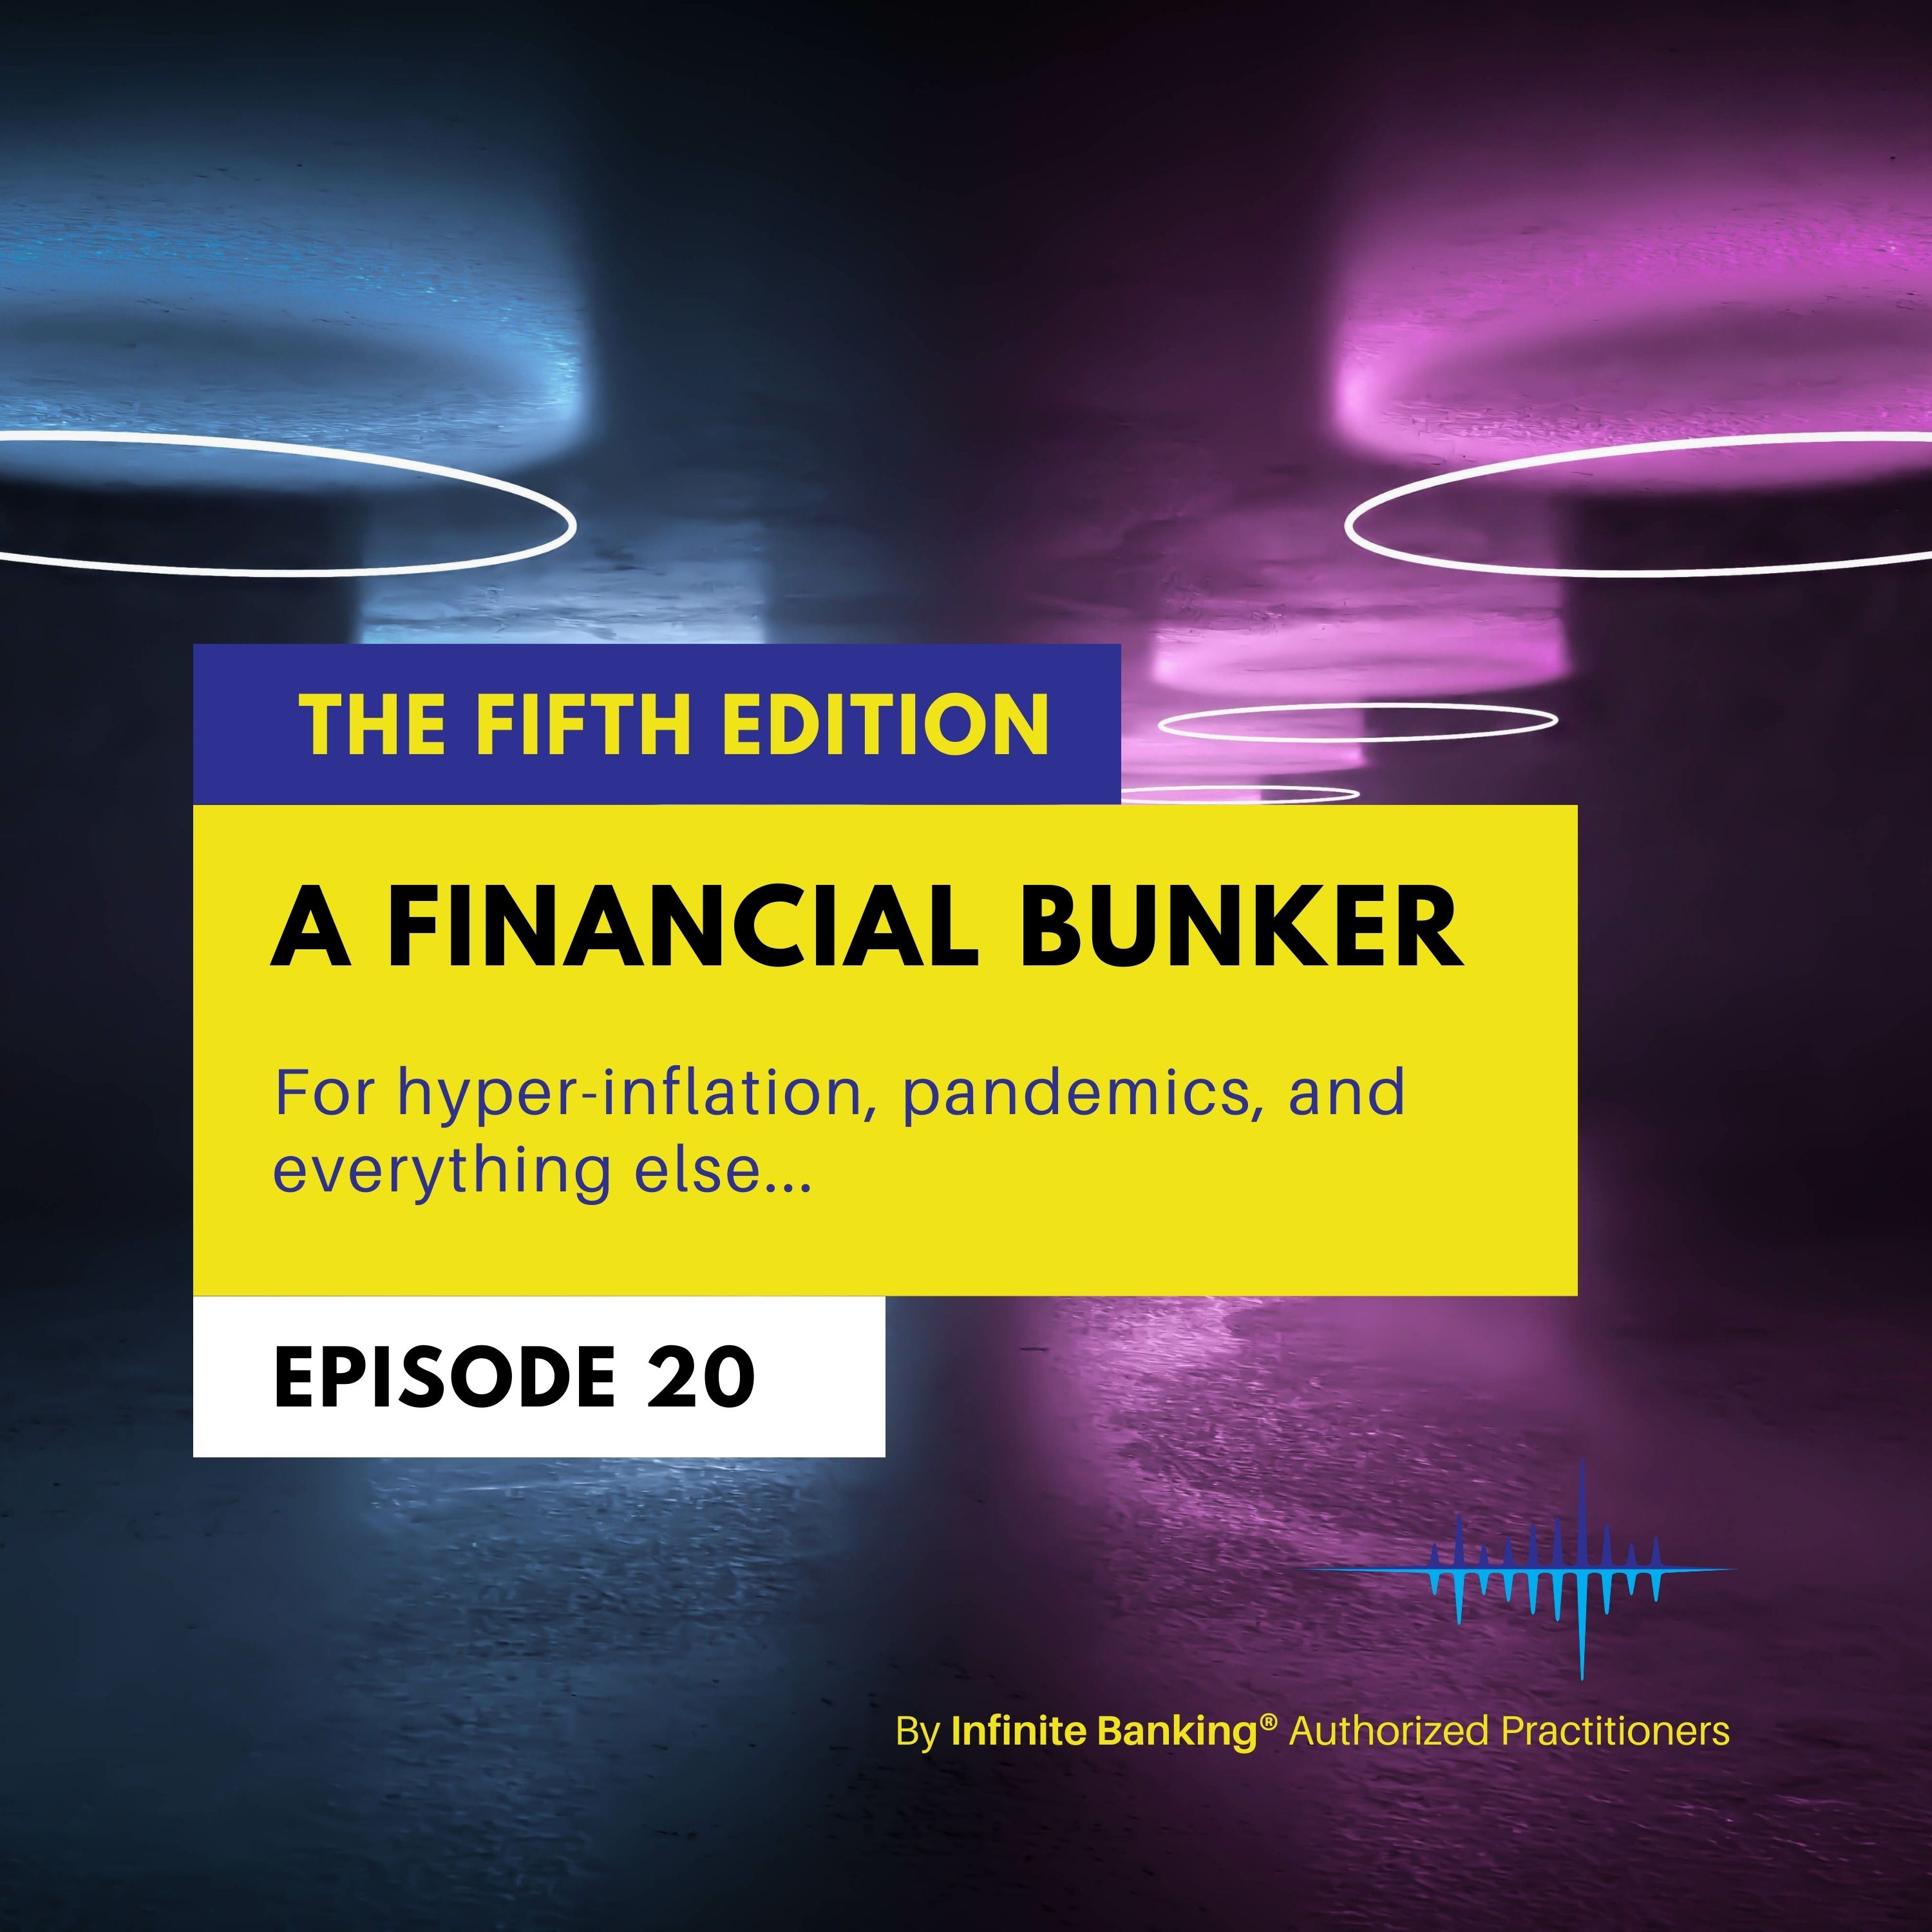 A Financial Bunker For Hyperinflation, Pandemics, and Everything Else